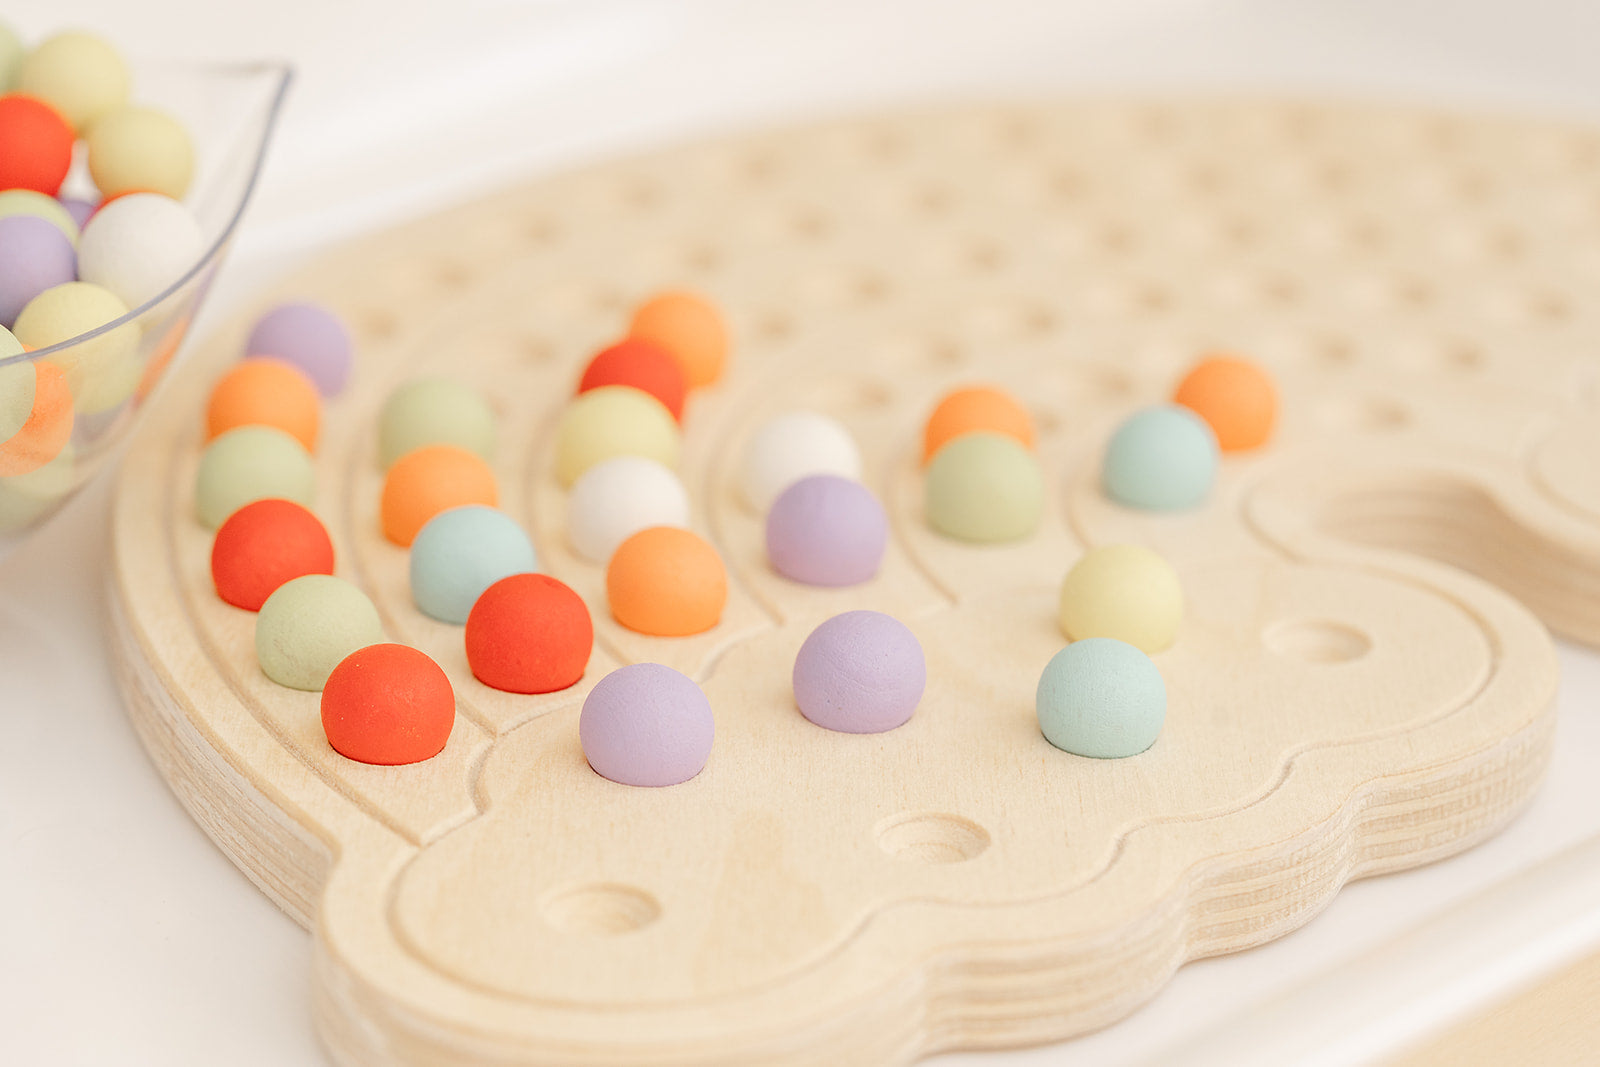 Rainbow shaped activity board with bright painted wooden balls